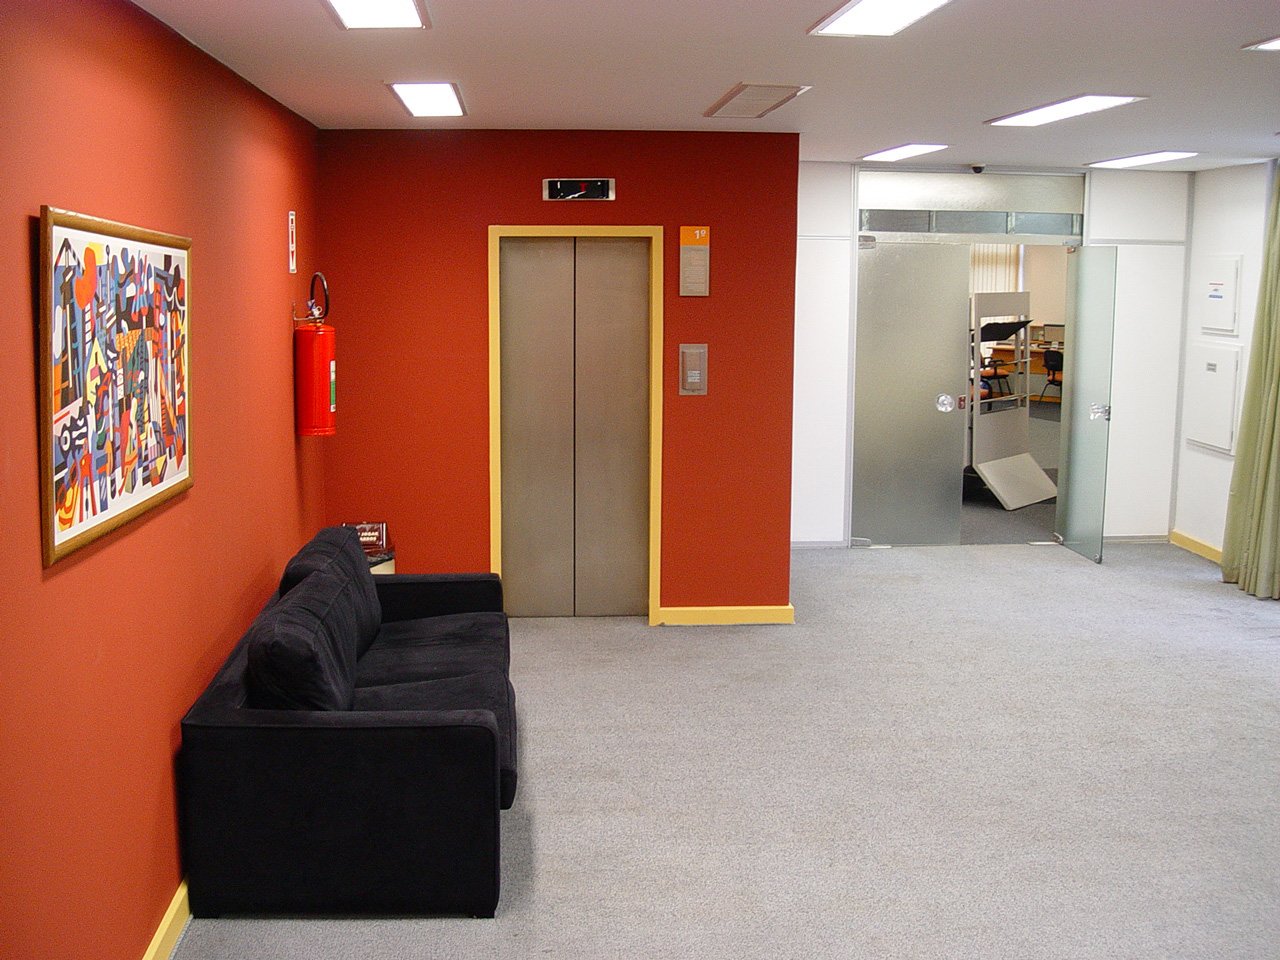 an orange and red wall with a black couch in the middle